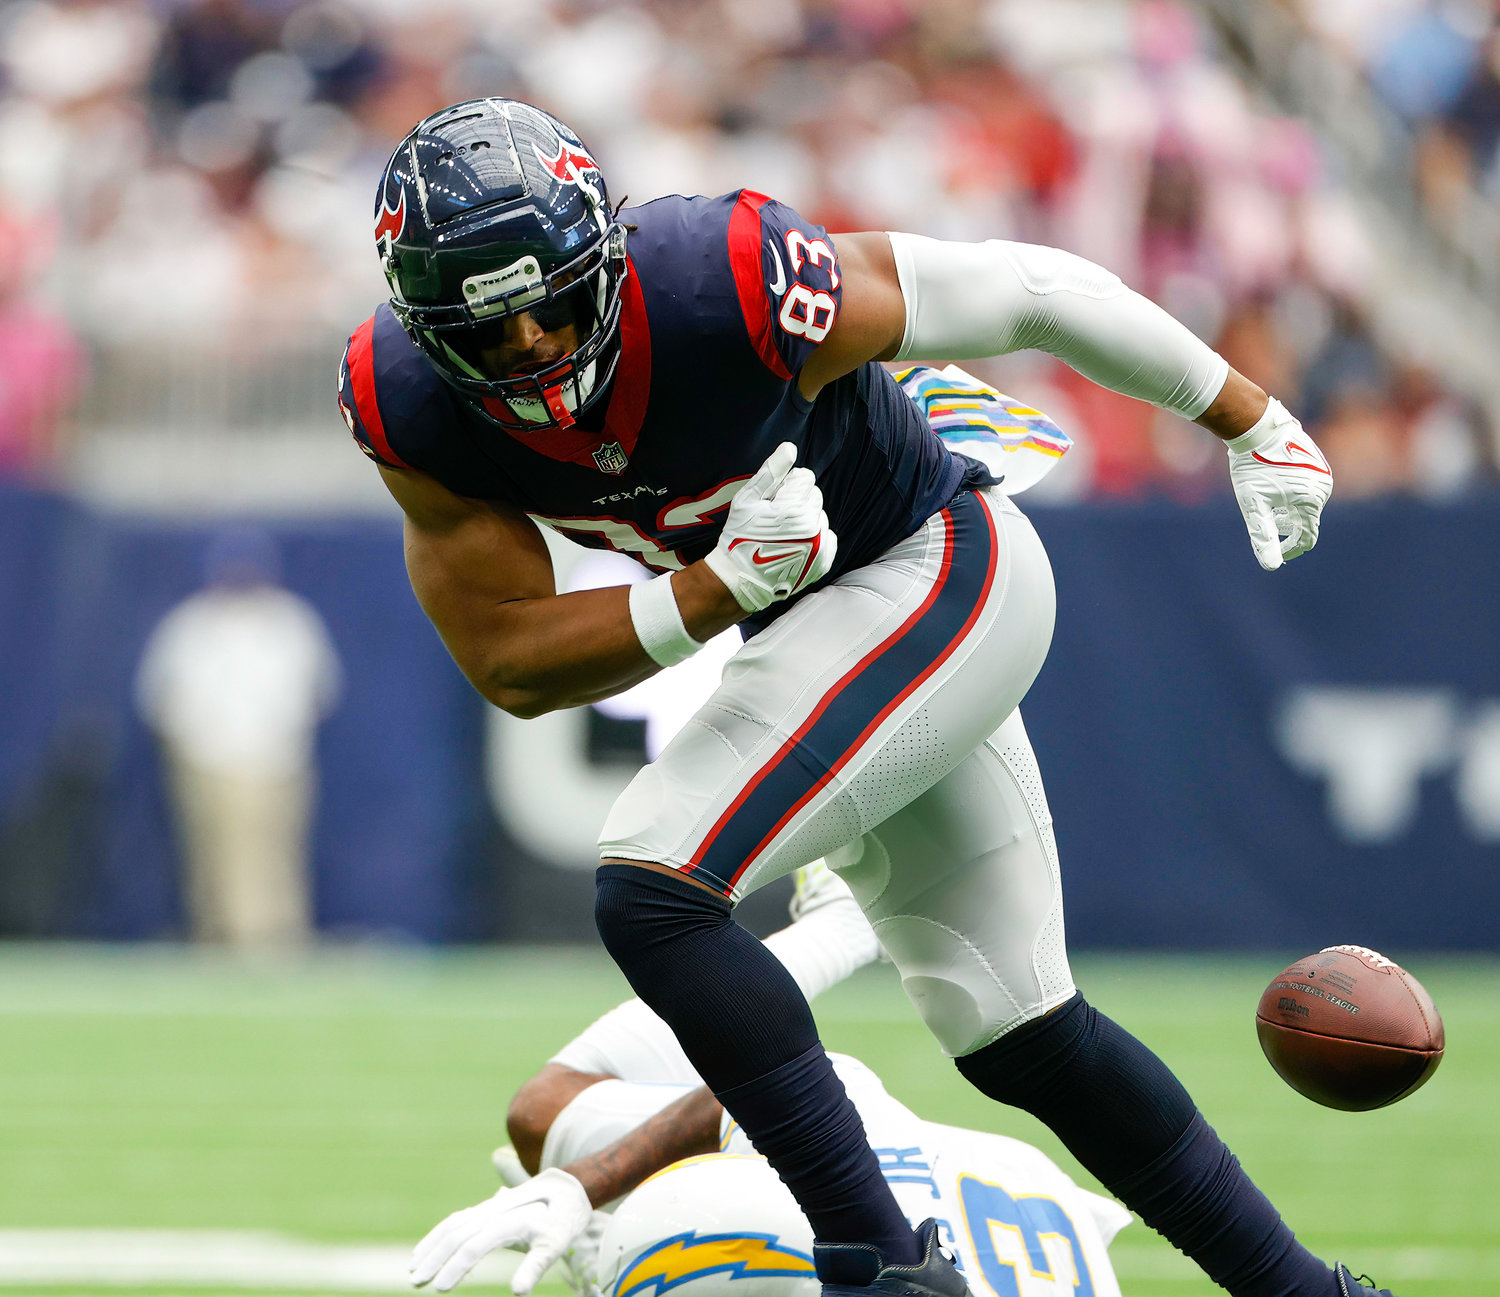 Texans tight end O.J. Howard (83) drops a pass during an NFL game between the Texans and the Chargers on Oct. 2, 2022 in Houston. The Chargers won 34-24.